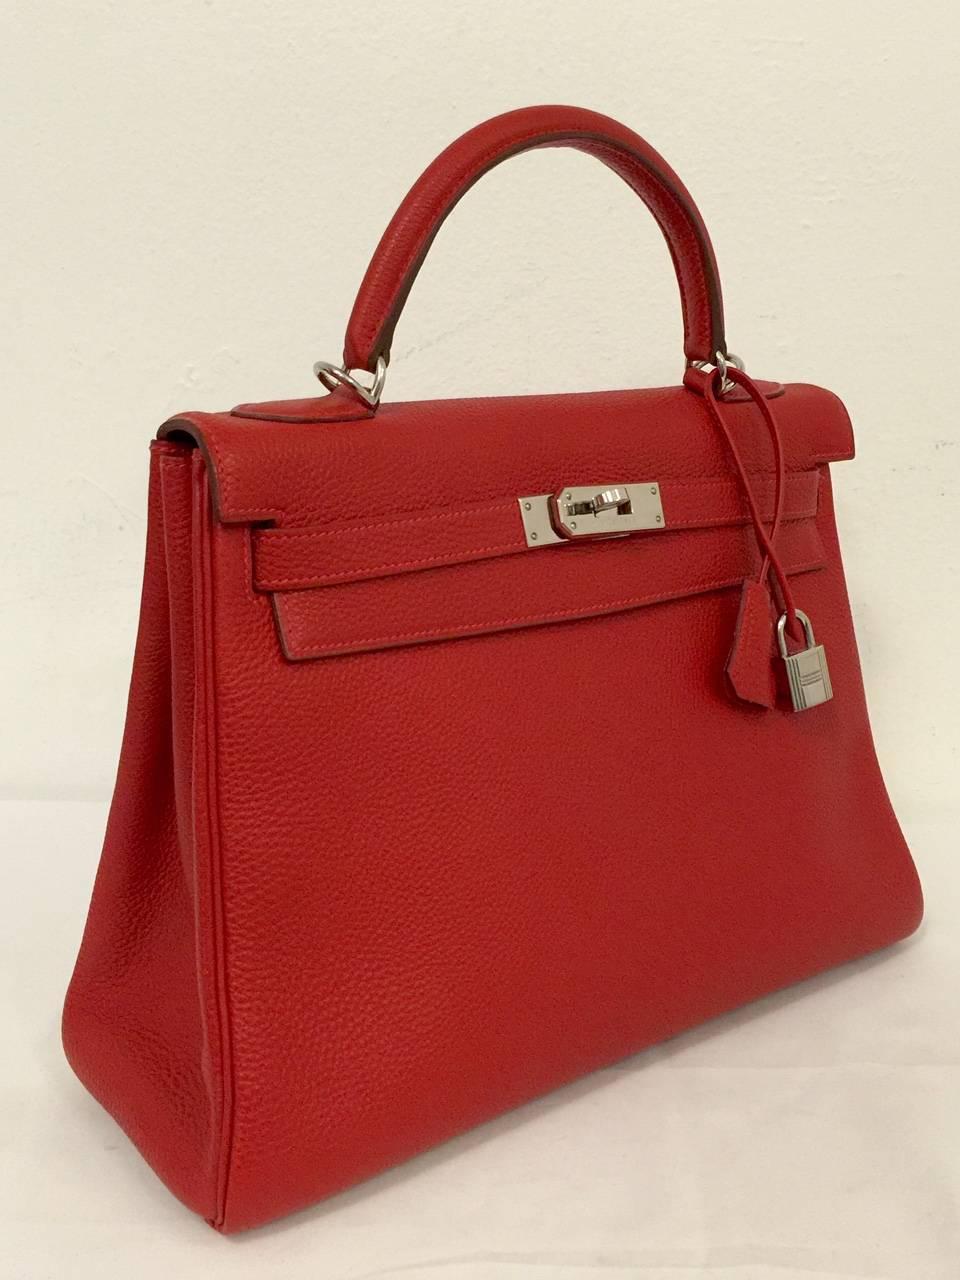 What can be said that hasn't been said about this truly inimitable classic handbag from the world's most respected purveyor of luxury goods?  The Hermes Kelly is differentiated by its trapezium shape, thin straps with metal plates on the end of each